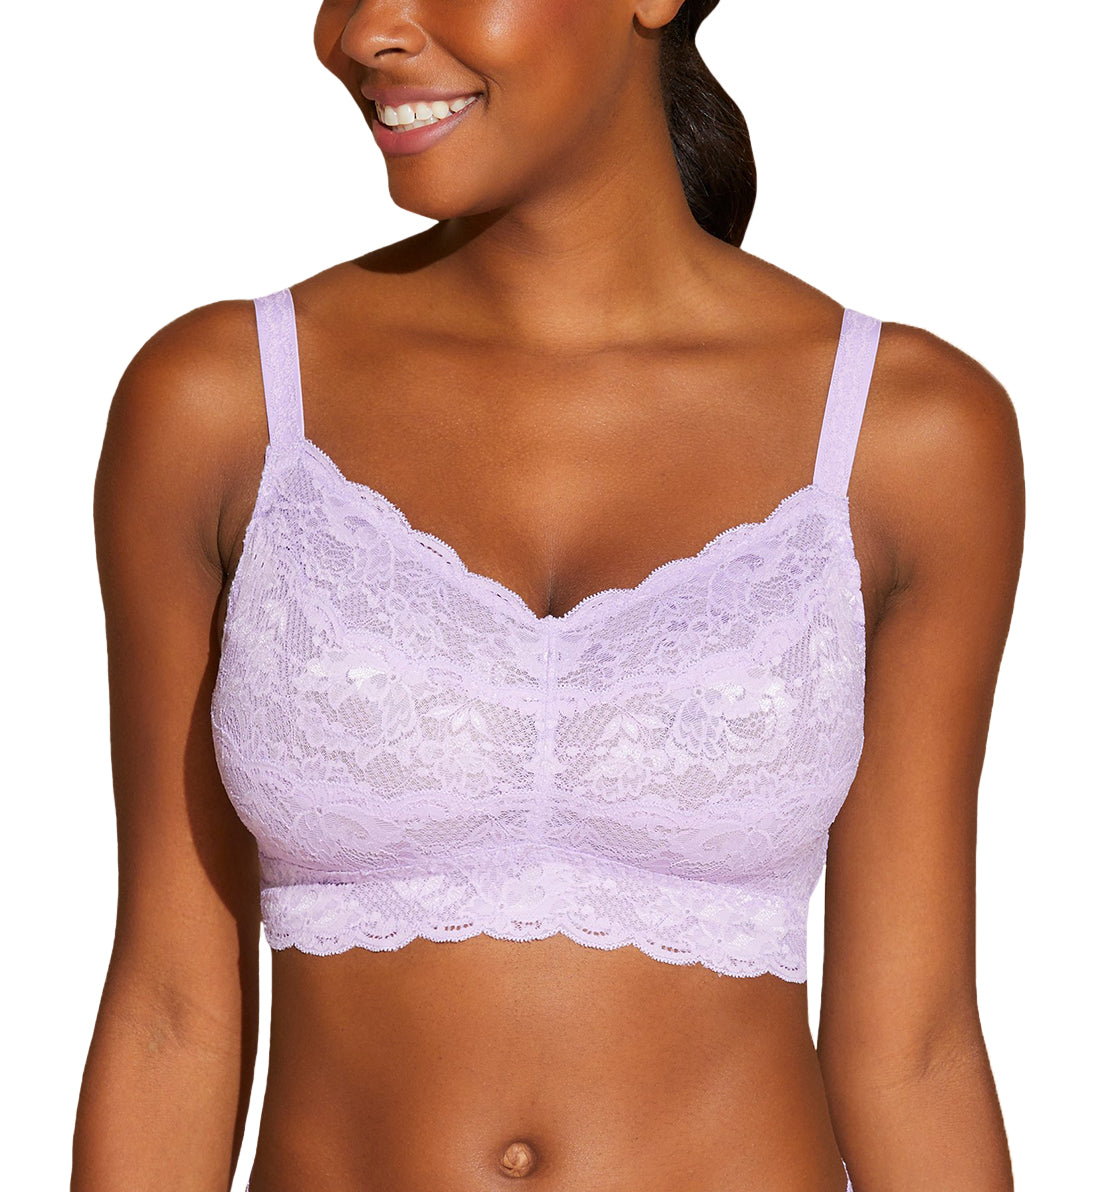 Cosabella Never Say Never CURVY Sweetie Bralette (NEVER1310),XS,Icy Violet - Icy Violet,XS